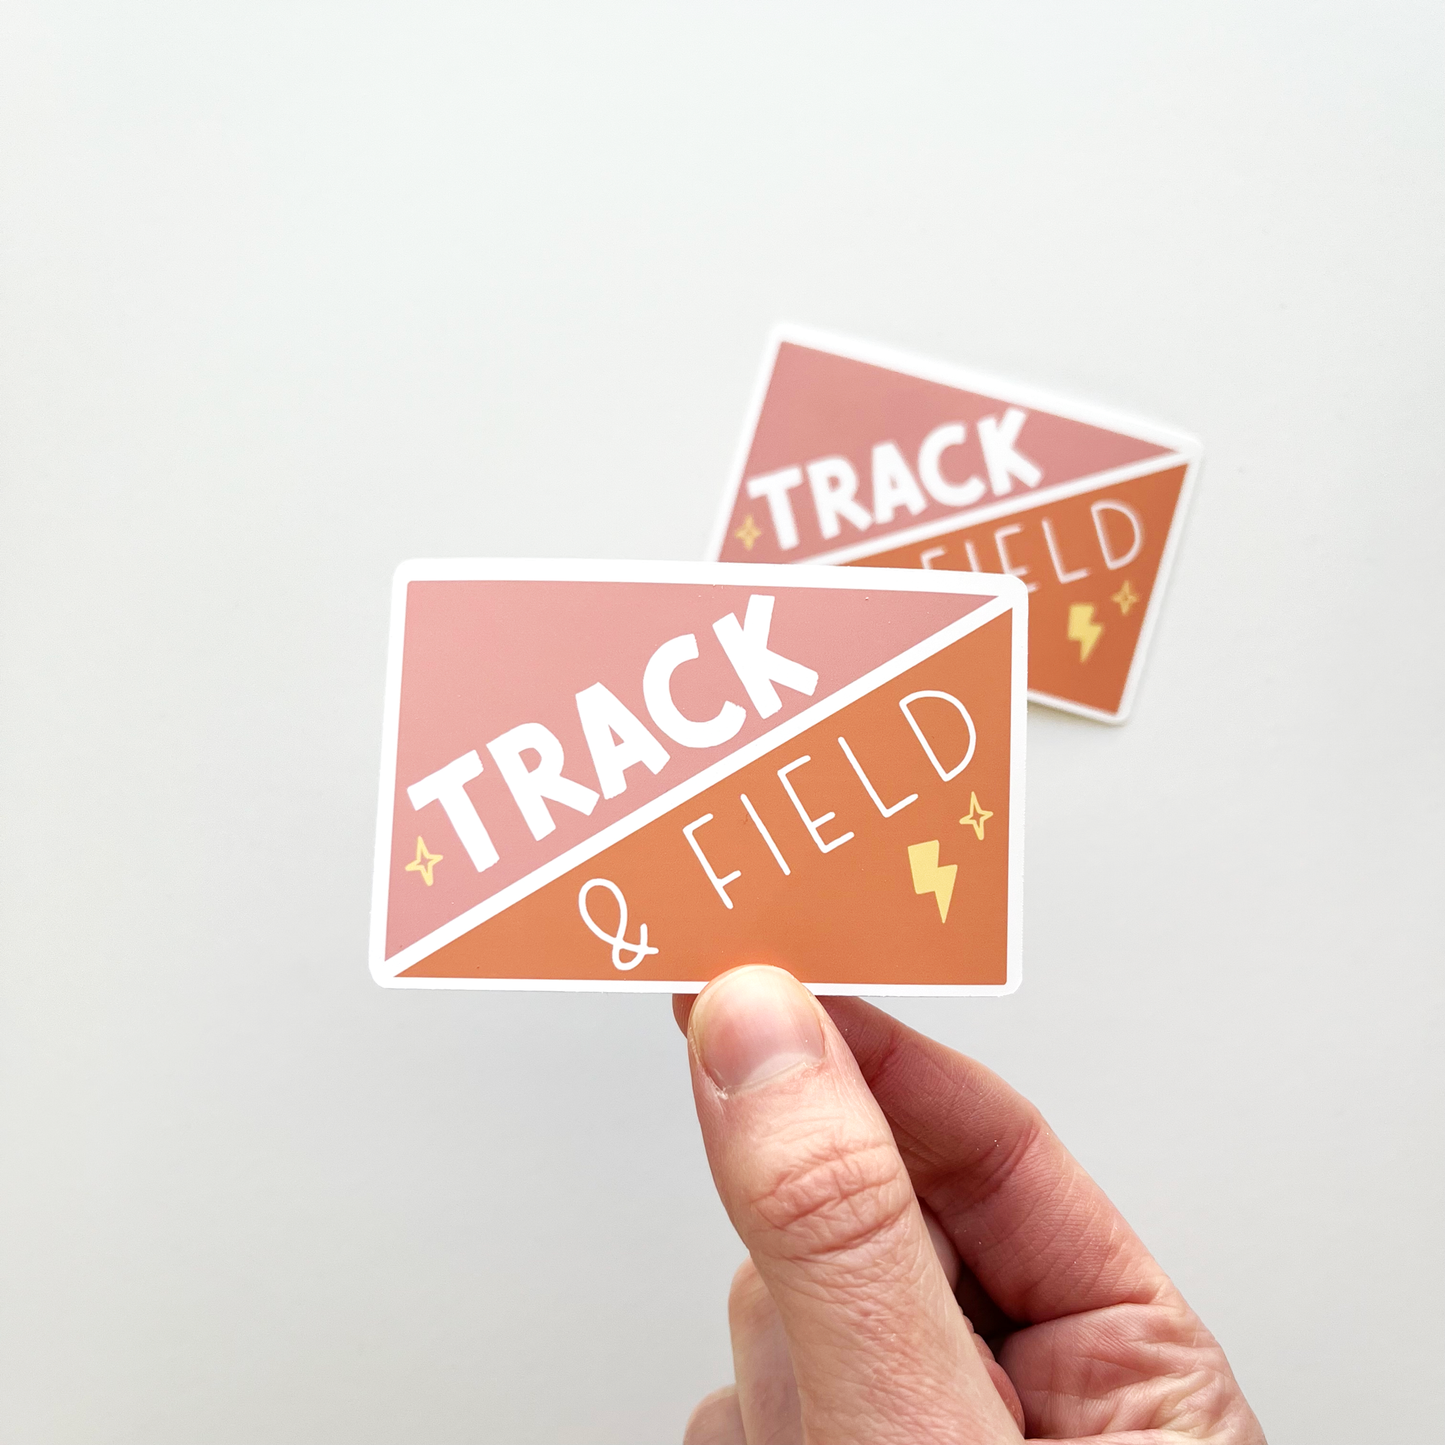 Track and field rectangular sticker in pink and orange